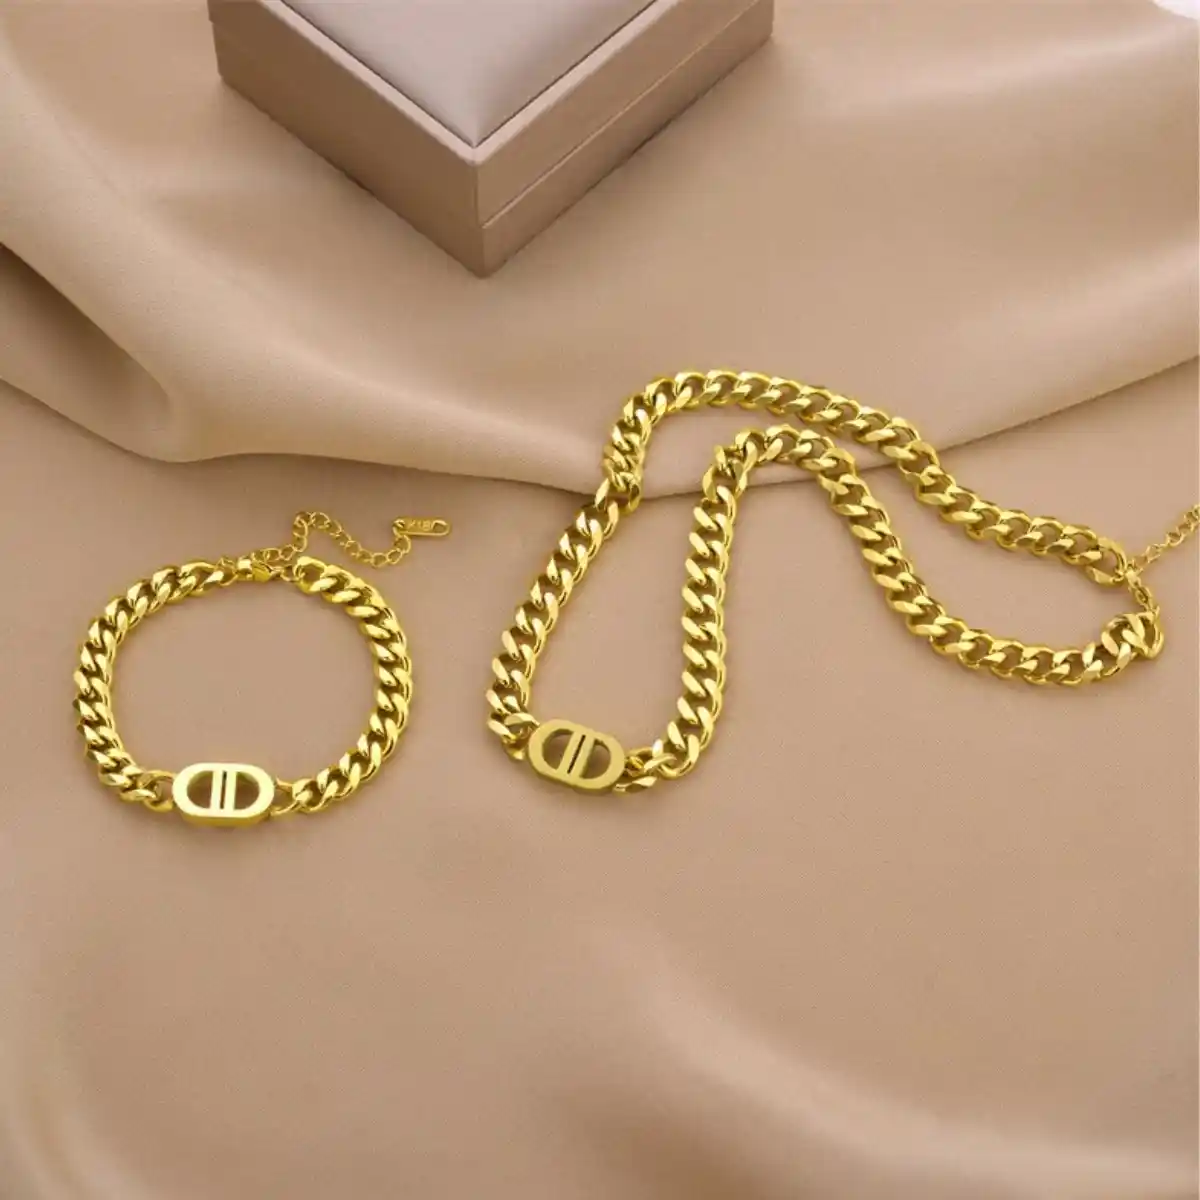 Dior chain necklace dupe